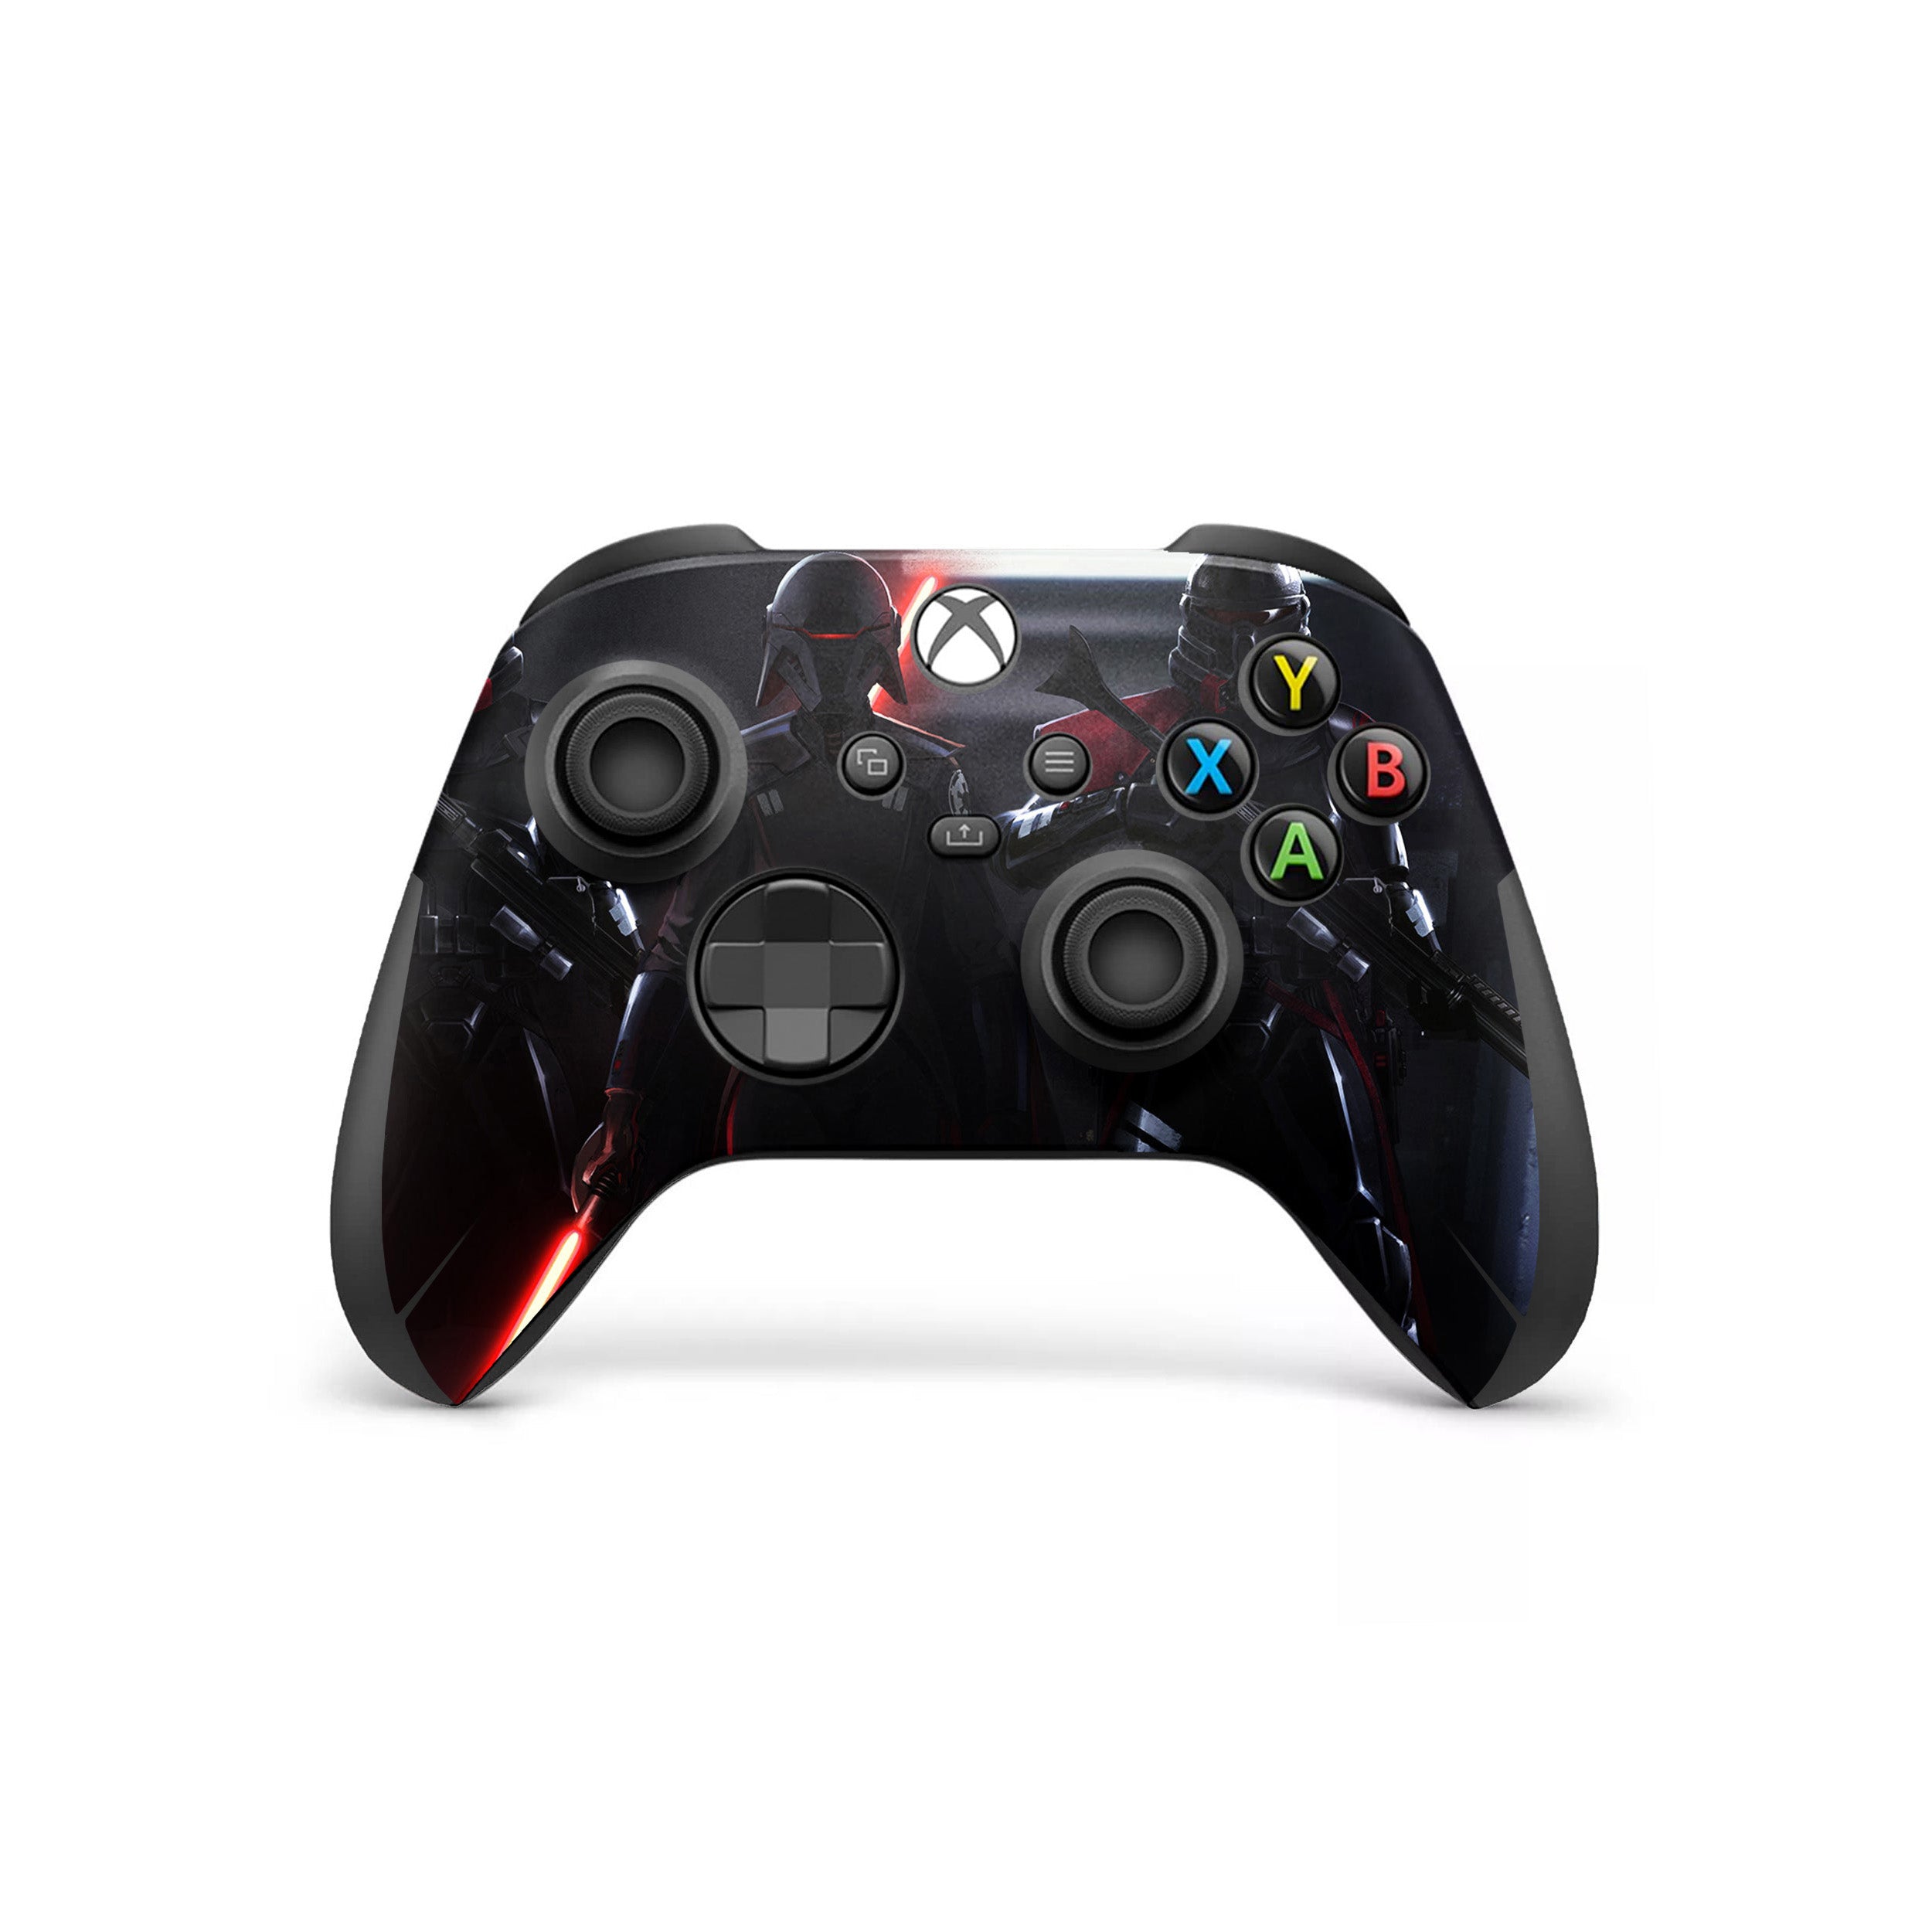 A video game skin featuring a Star Wars Jedi Fallen Order design for the Xbox Wireless Controller.